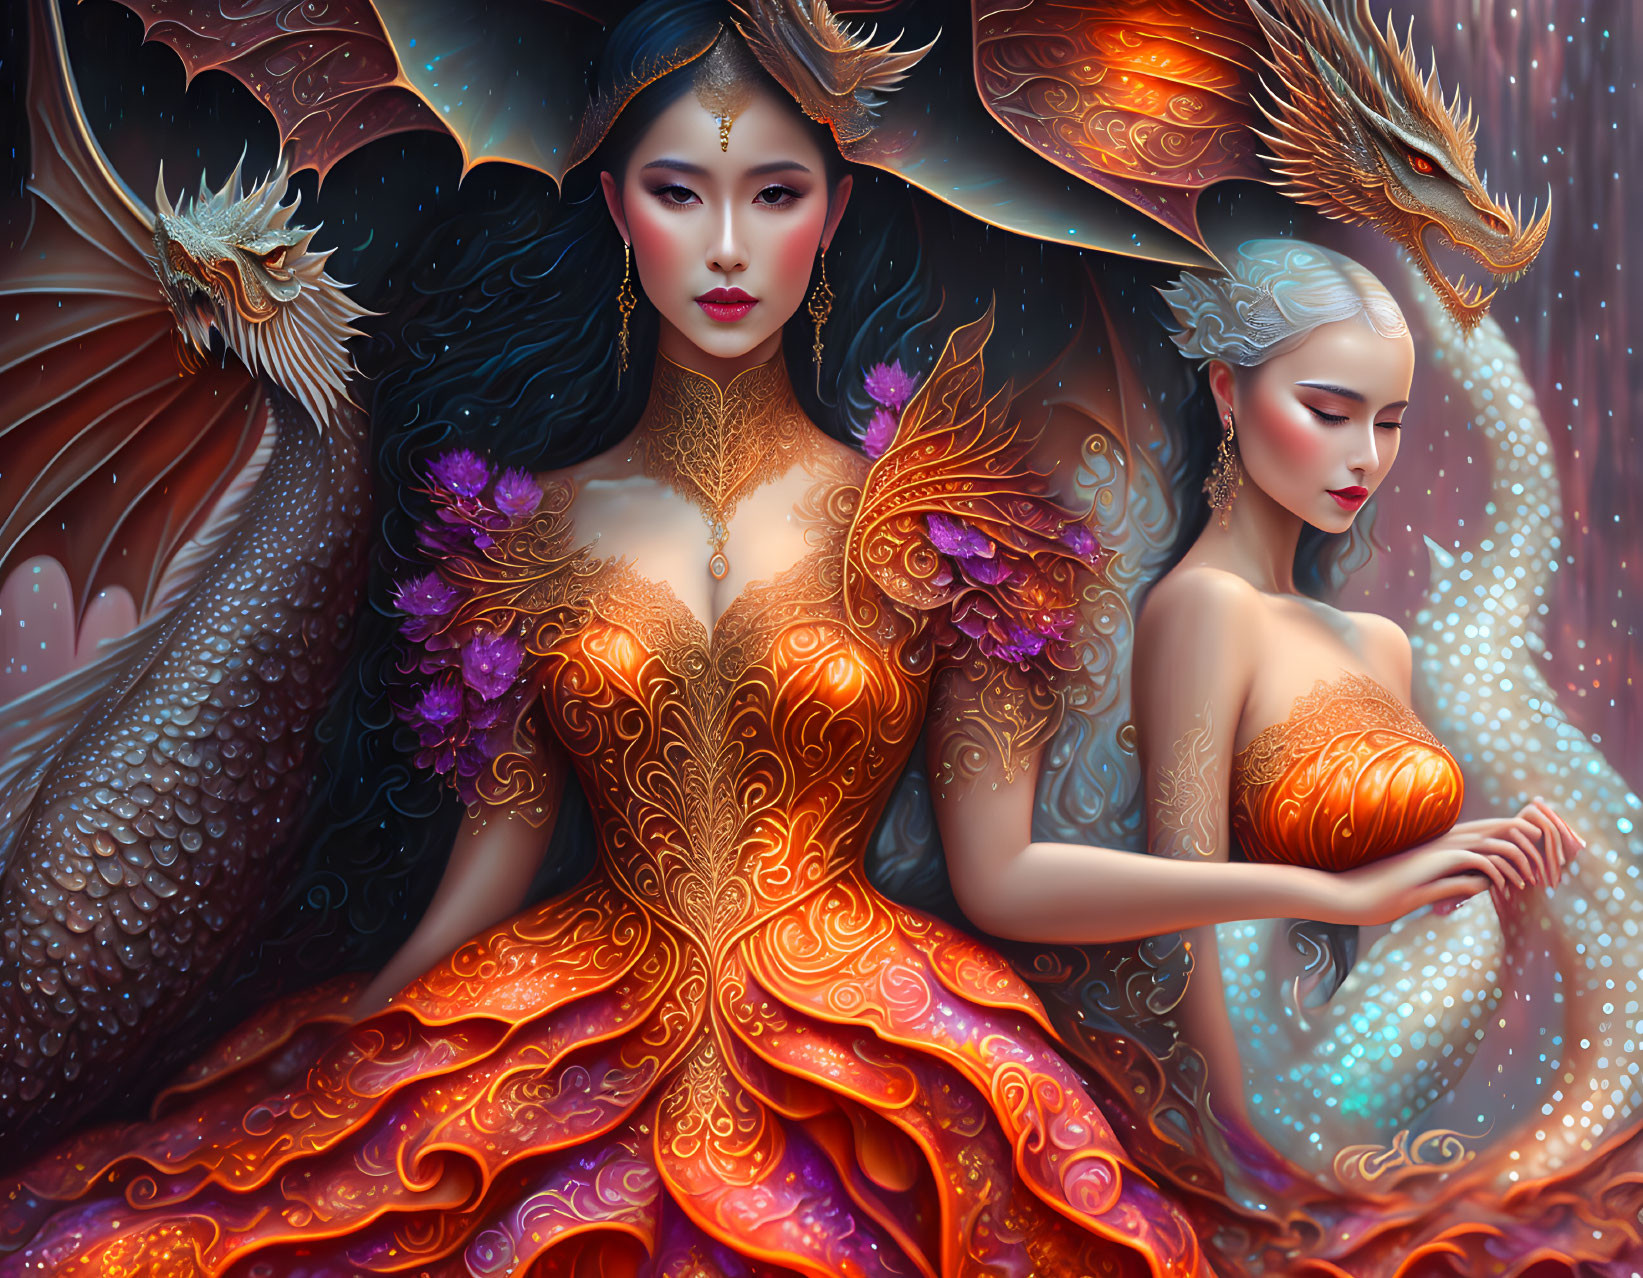 Ethereal women in dragon-themed attire with mystical backgrounds